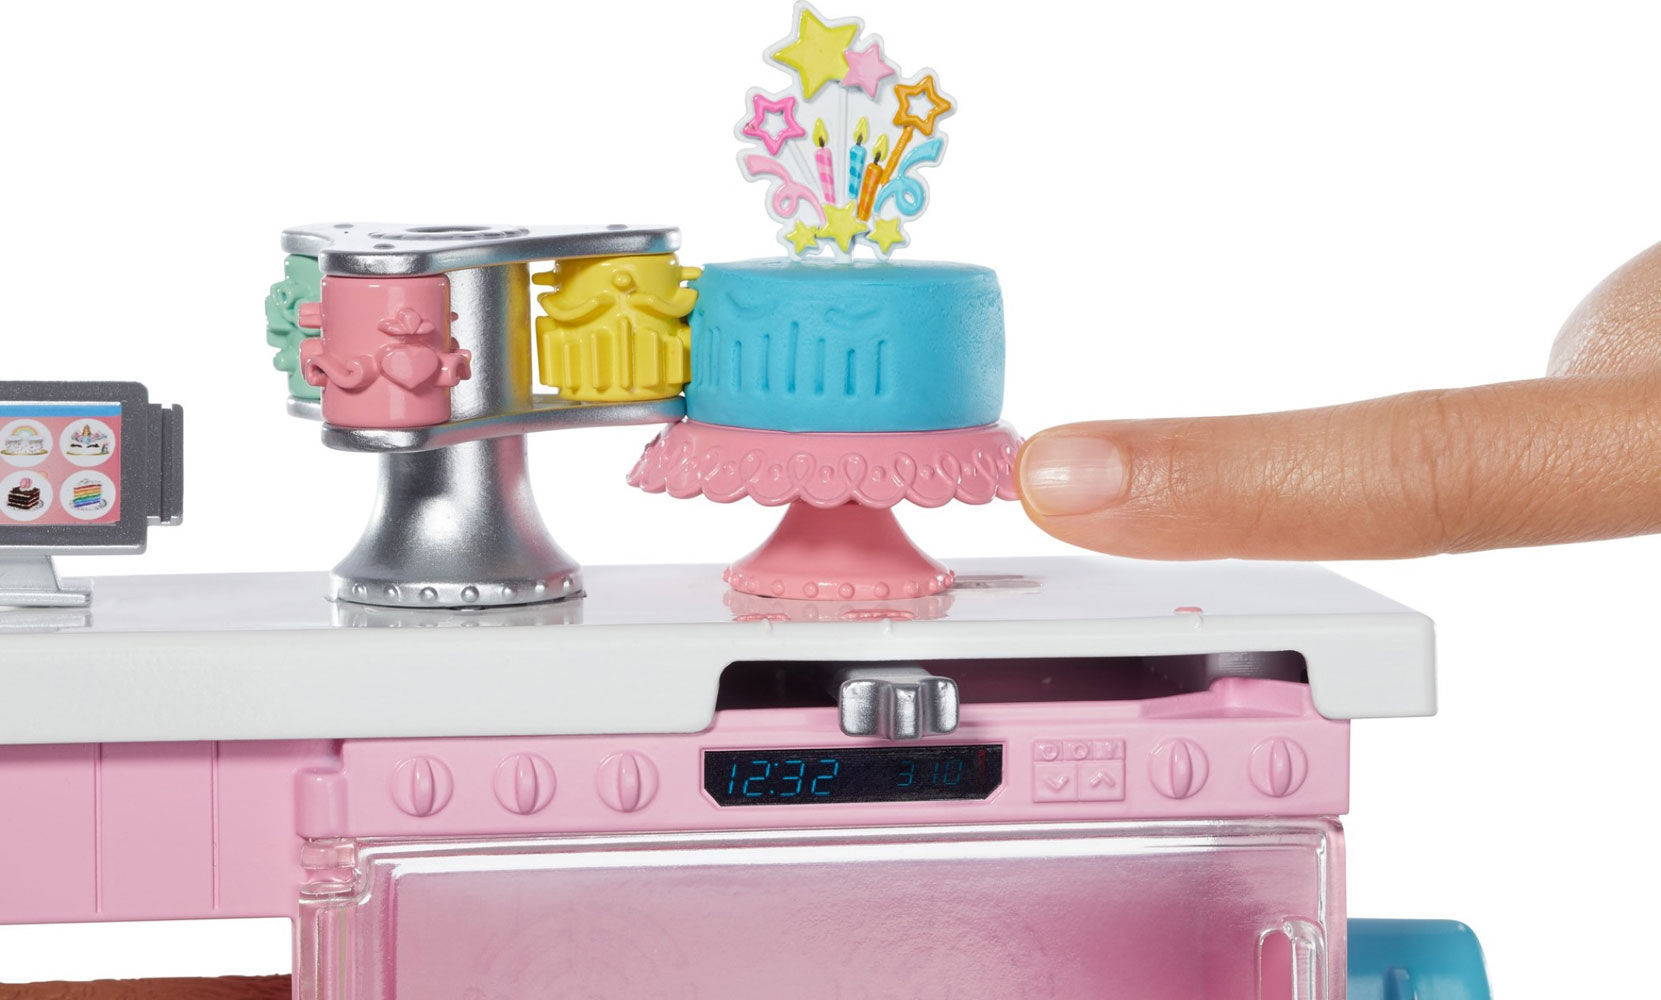 barbie cake decorating playset and doll